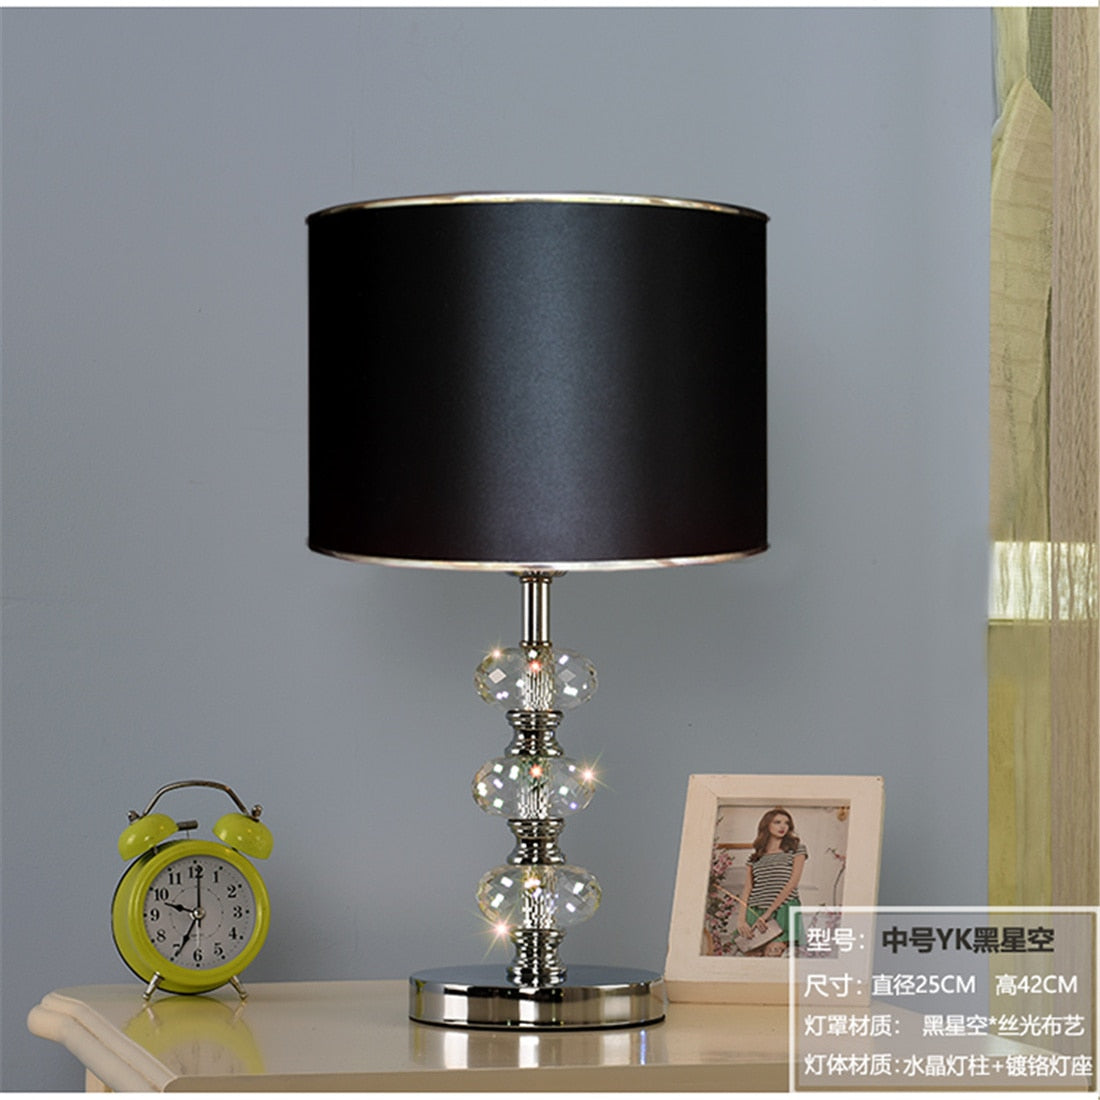 Crystal Gold Silver Pvc Shade Led Table Lamp Decoration Lights